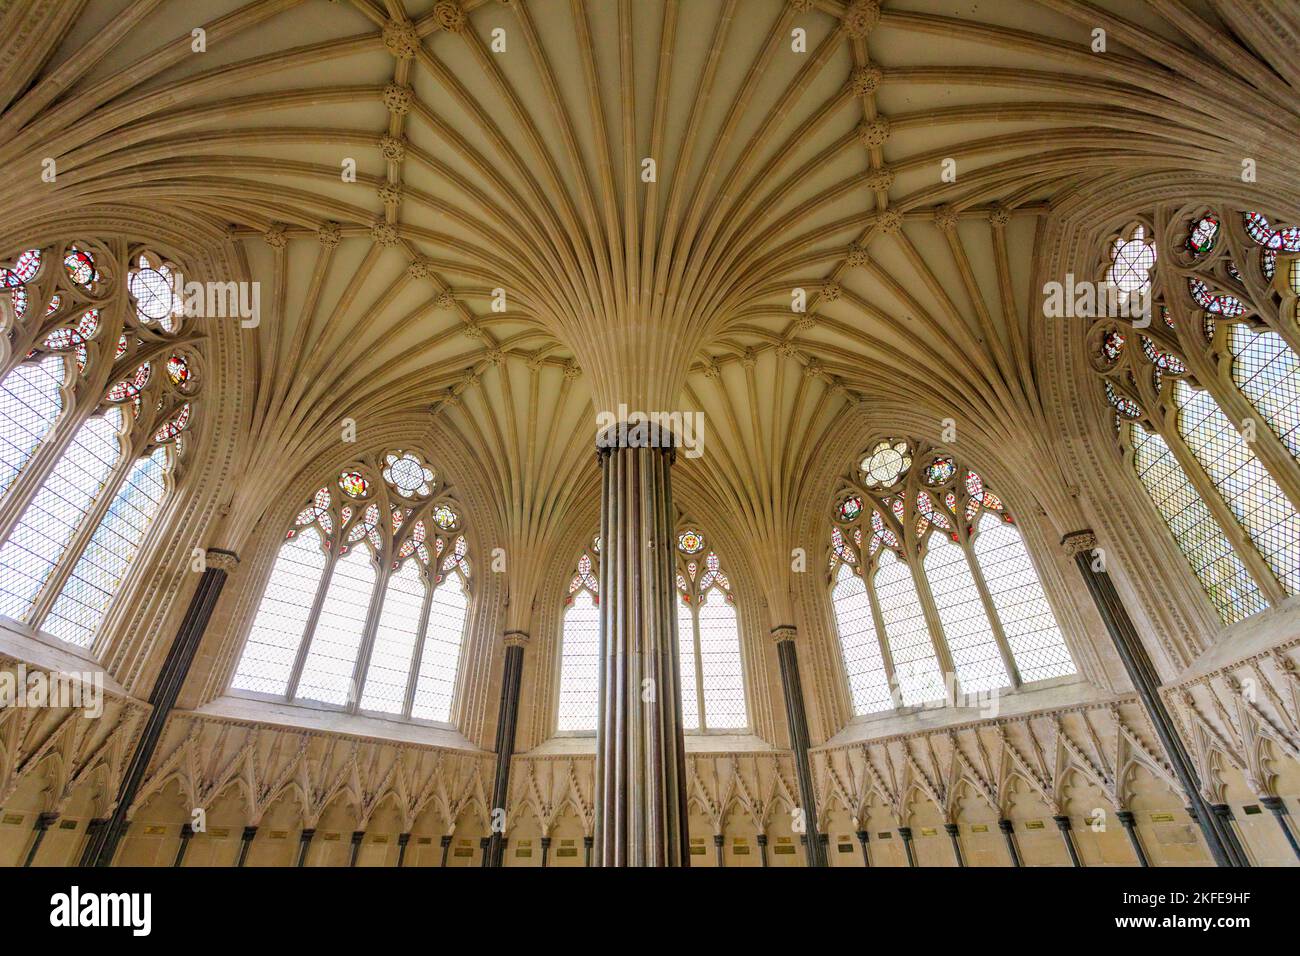 The decorative fan-vaulted ceiling of the Chapter House in Wells cathedral, Somerset, England, UK Stock Photo